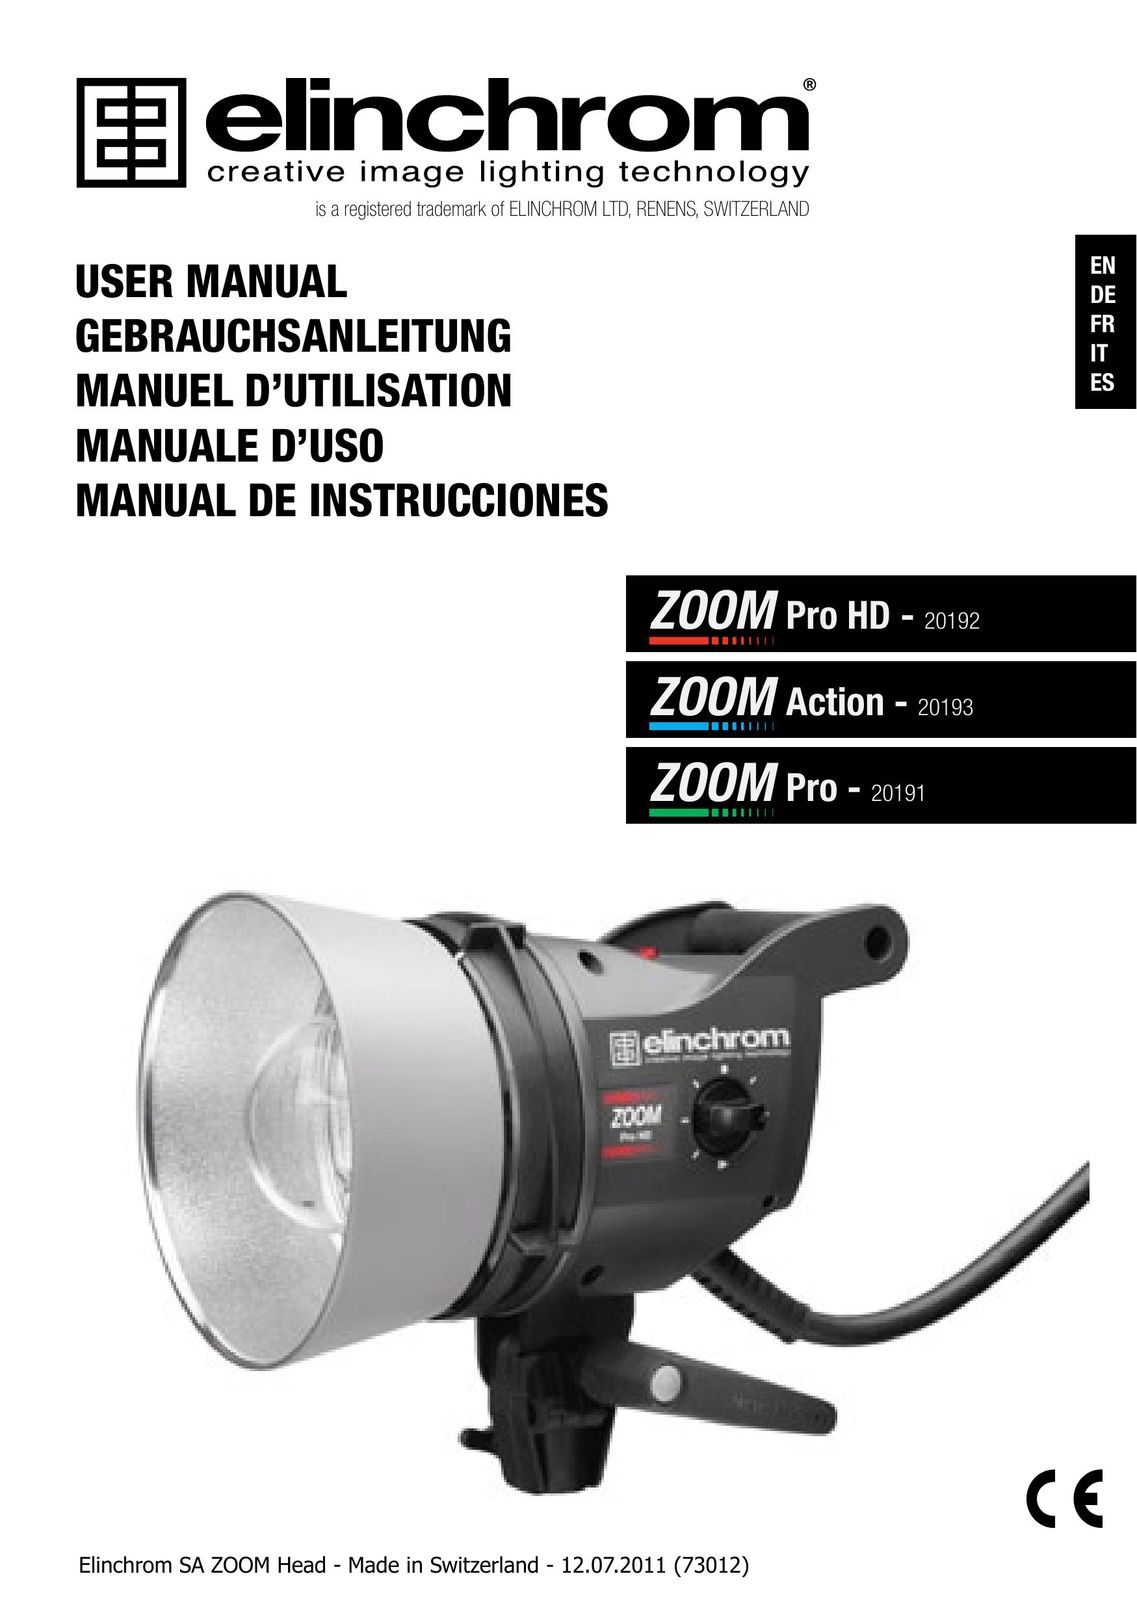 Elinchrom PRO - 20191 Home Safety Product User Manual